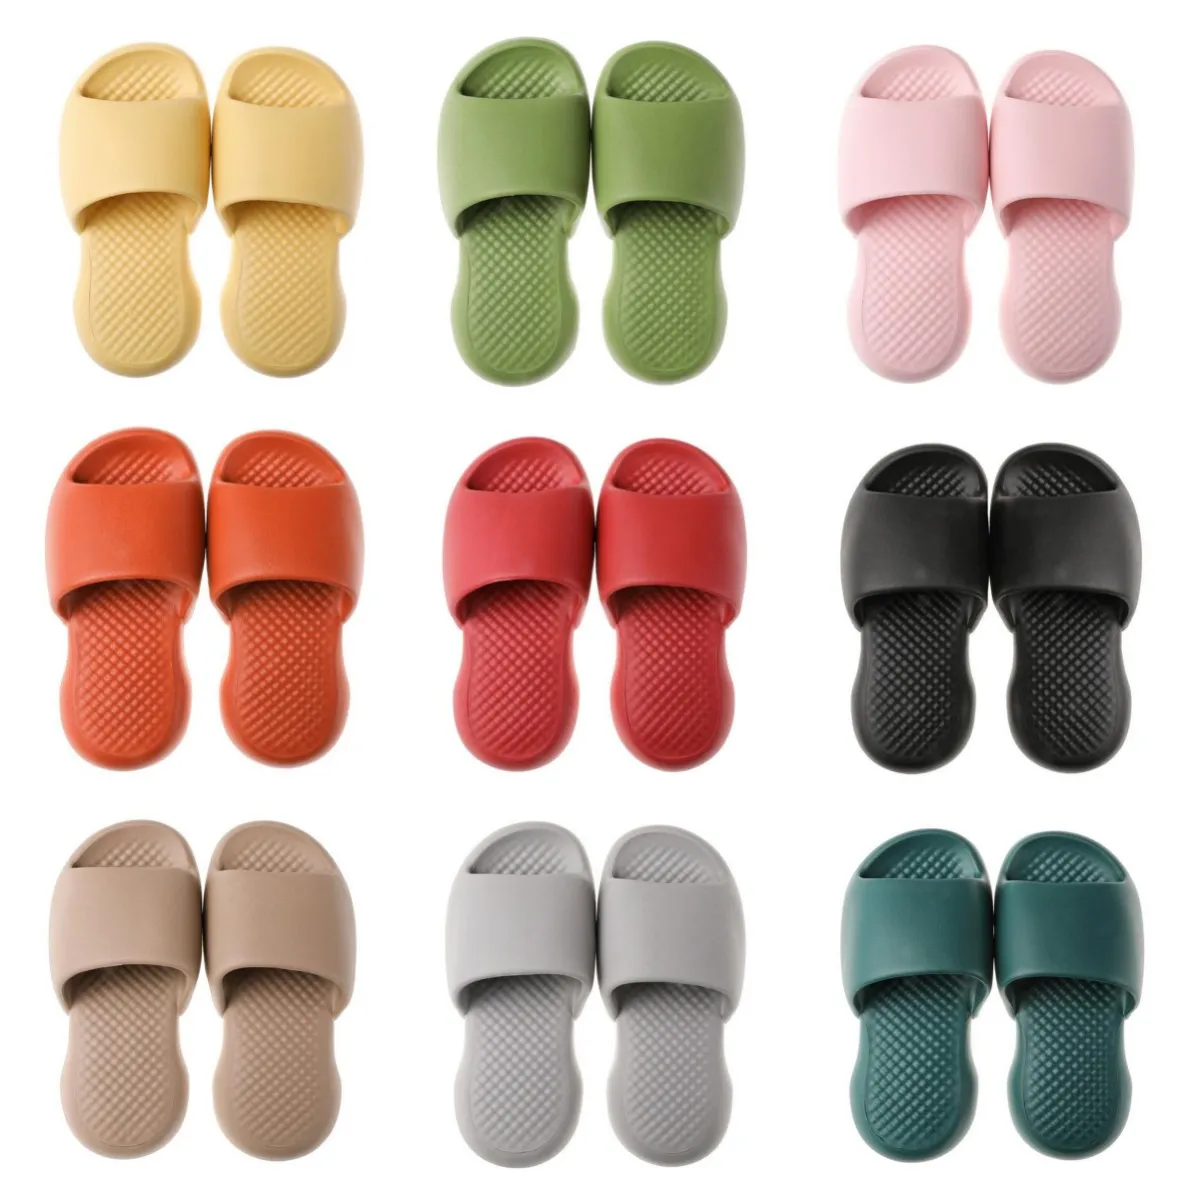 27 Best House Slippers for Women in 2022: Dearfoams, Birkenstock, UGG,  Vionic, OOFOS, and More | SELF